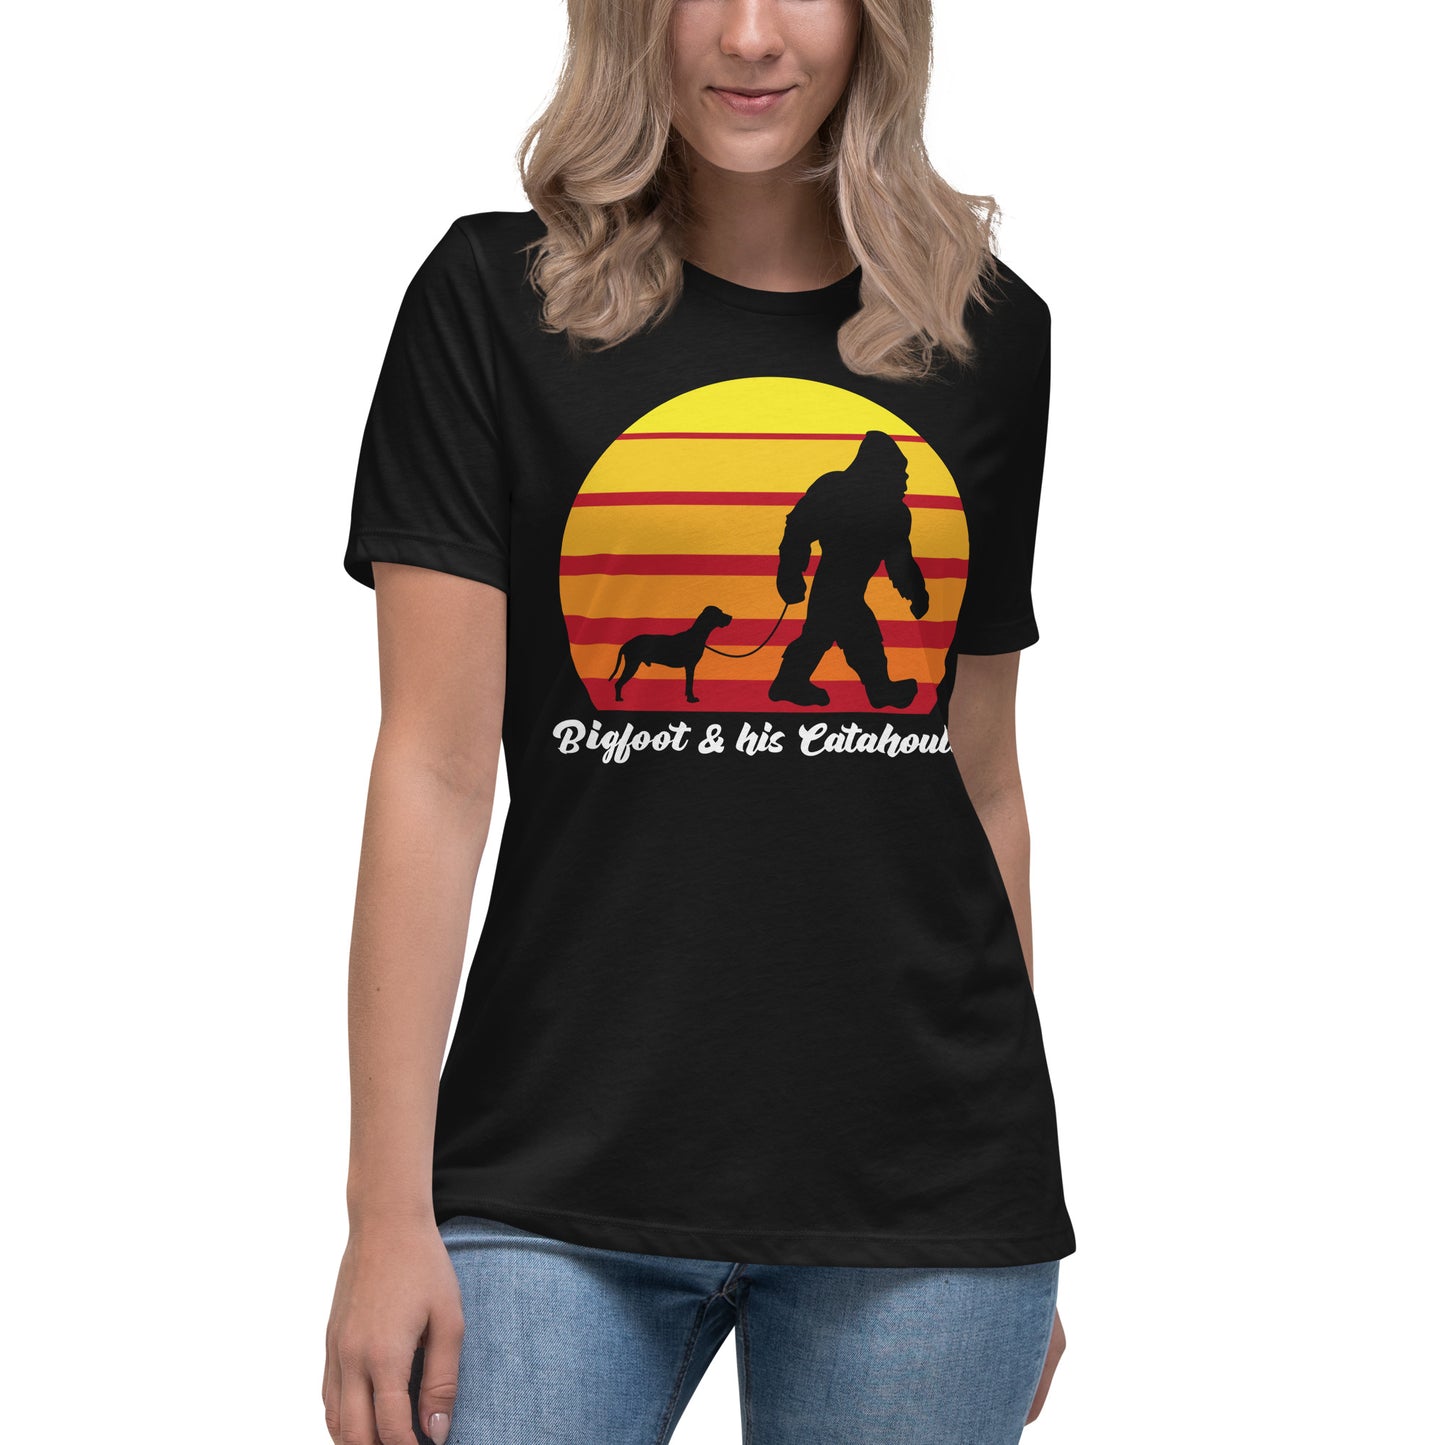 Big foot and his Catahoula women’s black t-shirt by Dog Artistry.